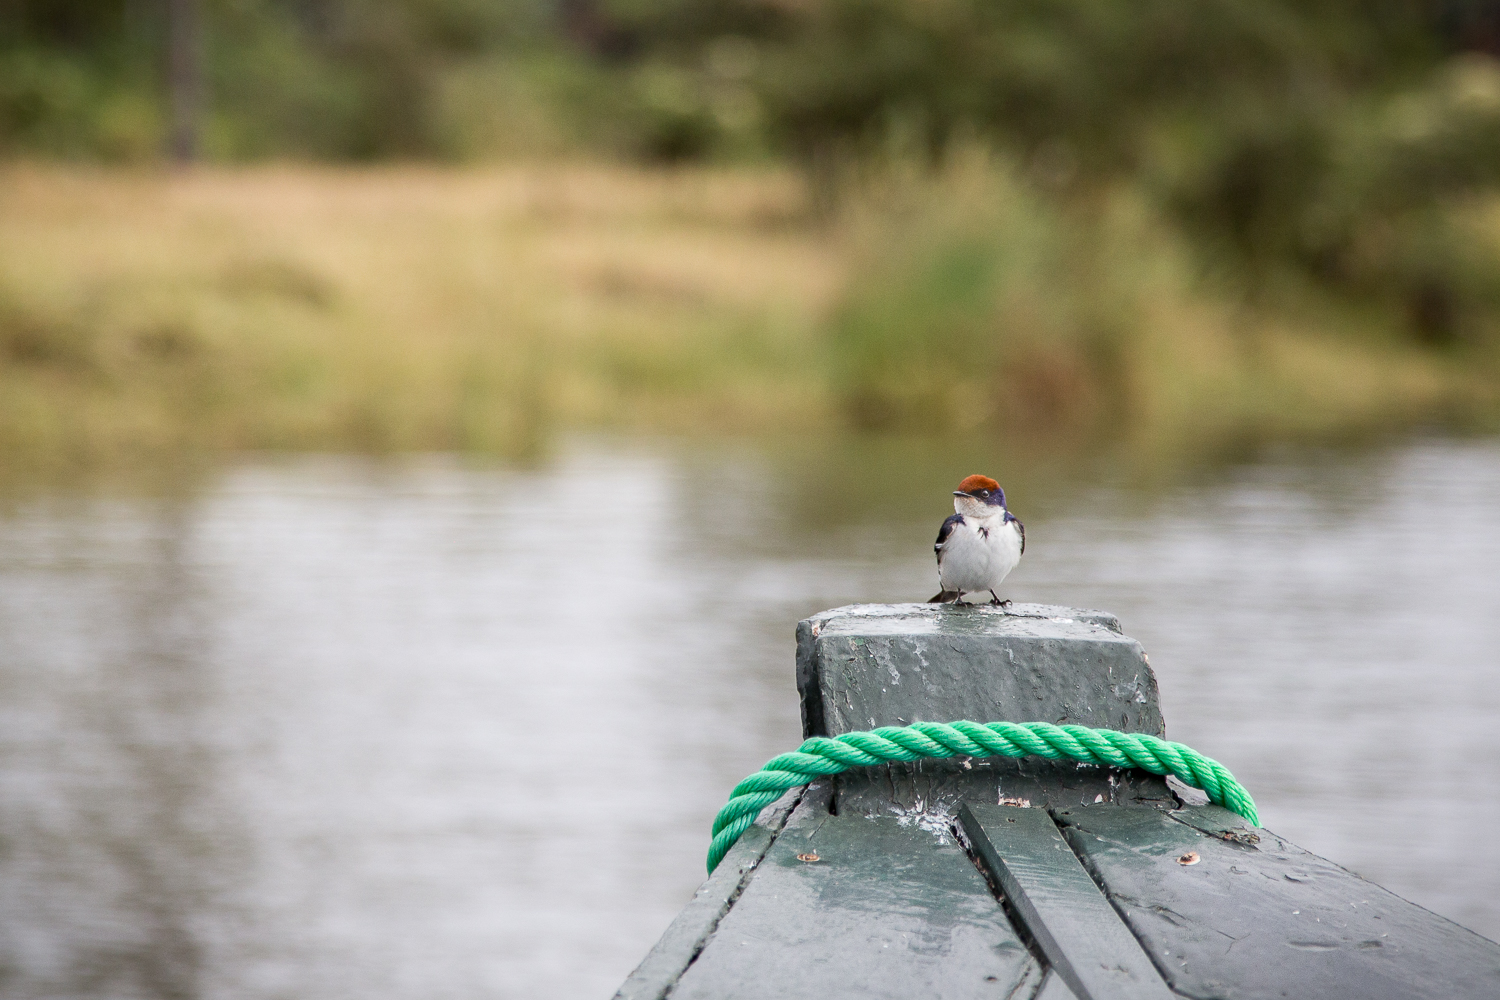  Not sure what kind of bird this is. Let's call it a Red Capped Boatrider 